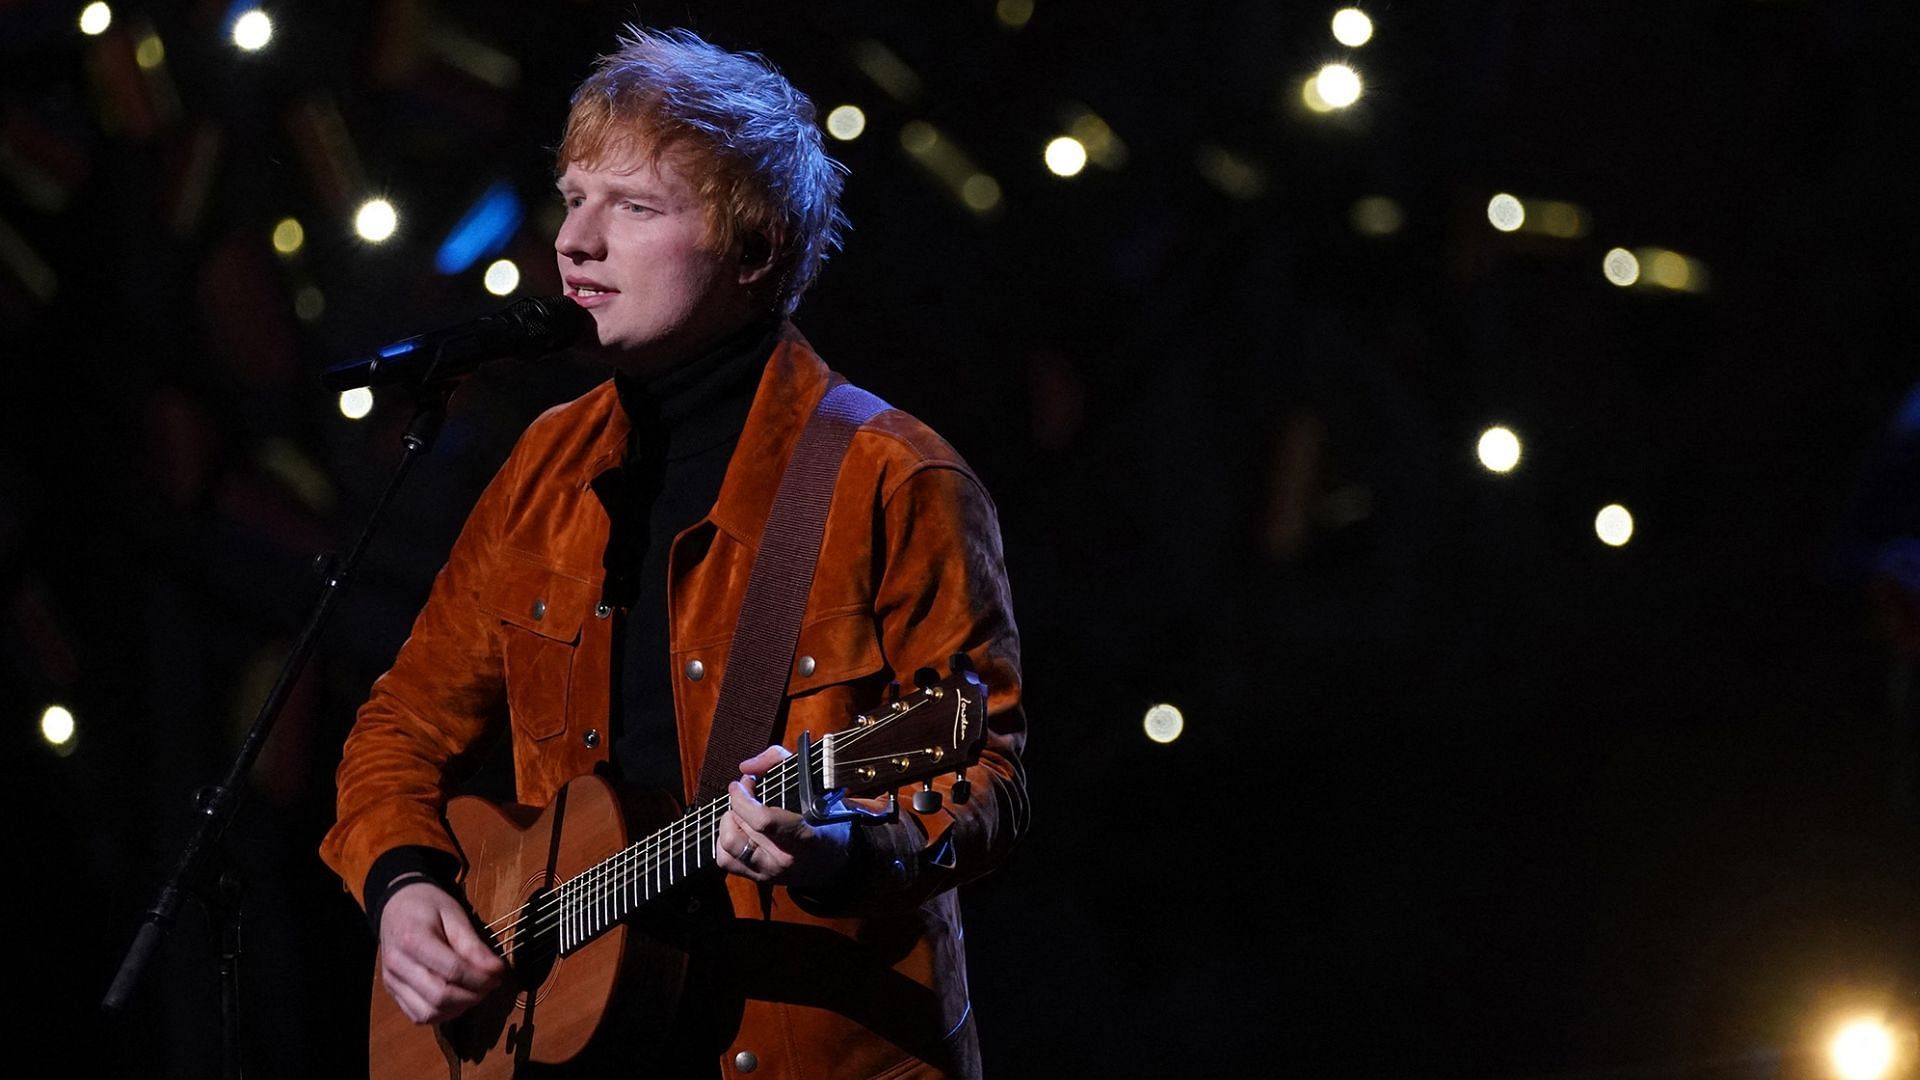 Ed Sheeran appeared before London&#039;s High Court for a copyright infringement case (Image via Getty Images)